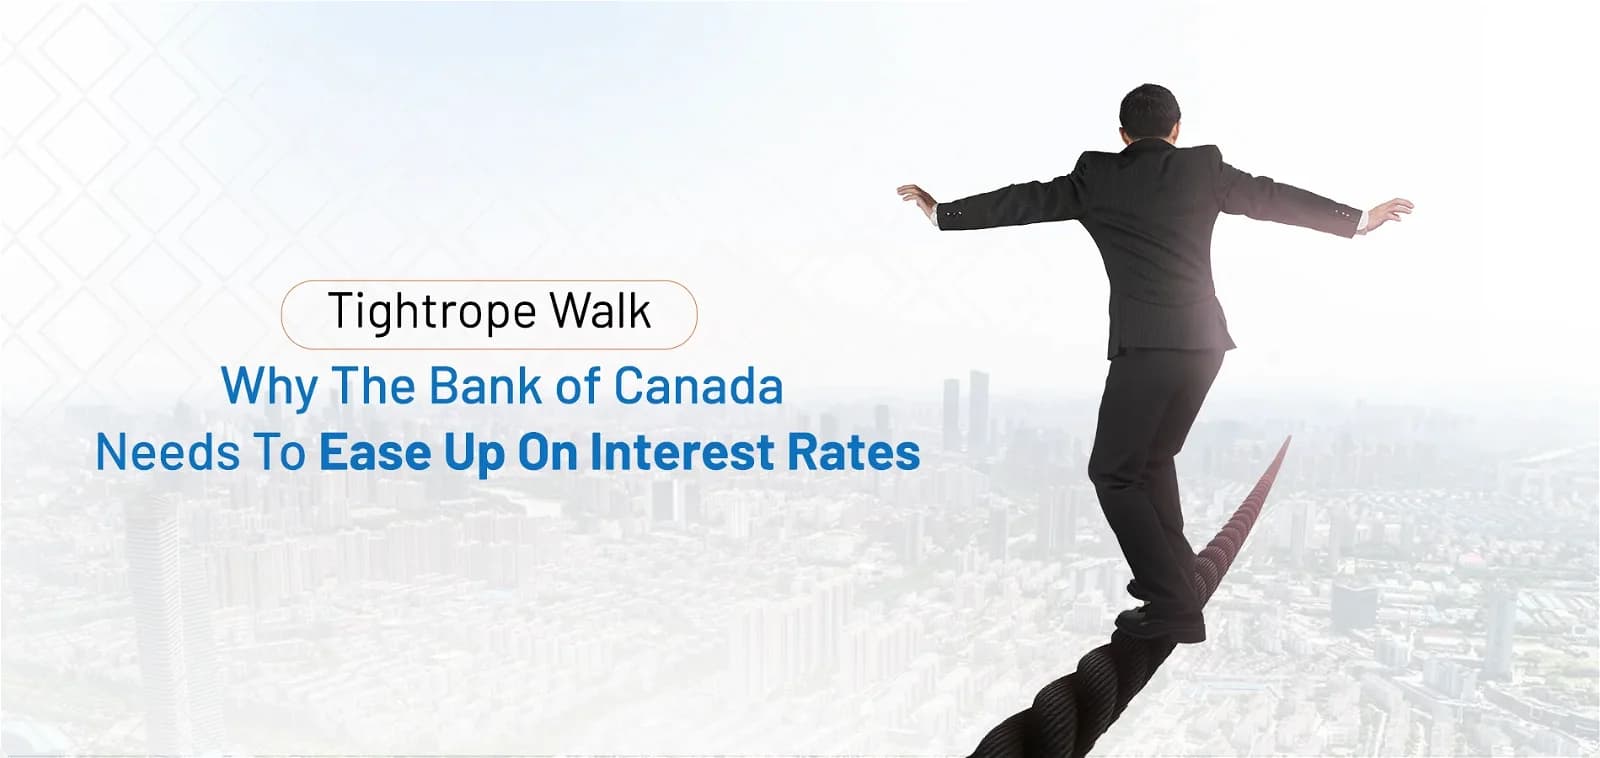 Tightrope Walk: Why the Bank of Canada Needs To Ease Up on Interest Rates